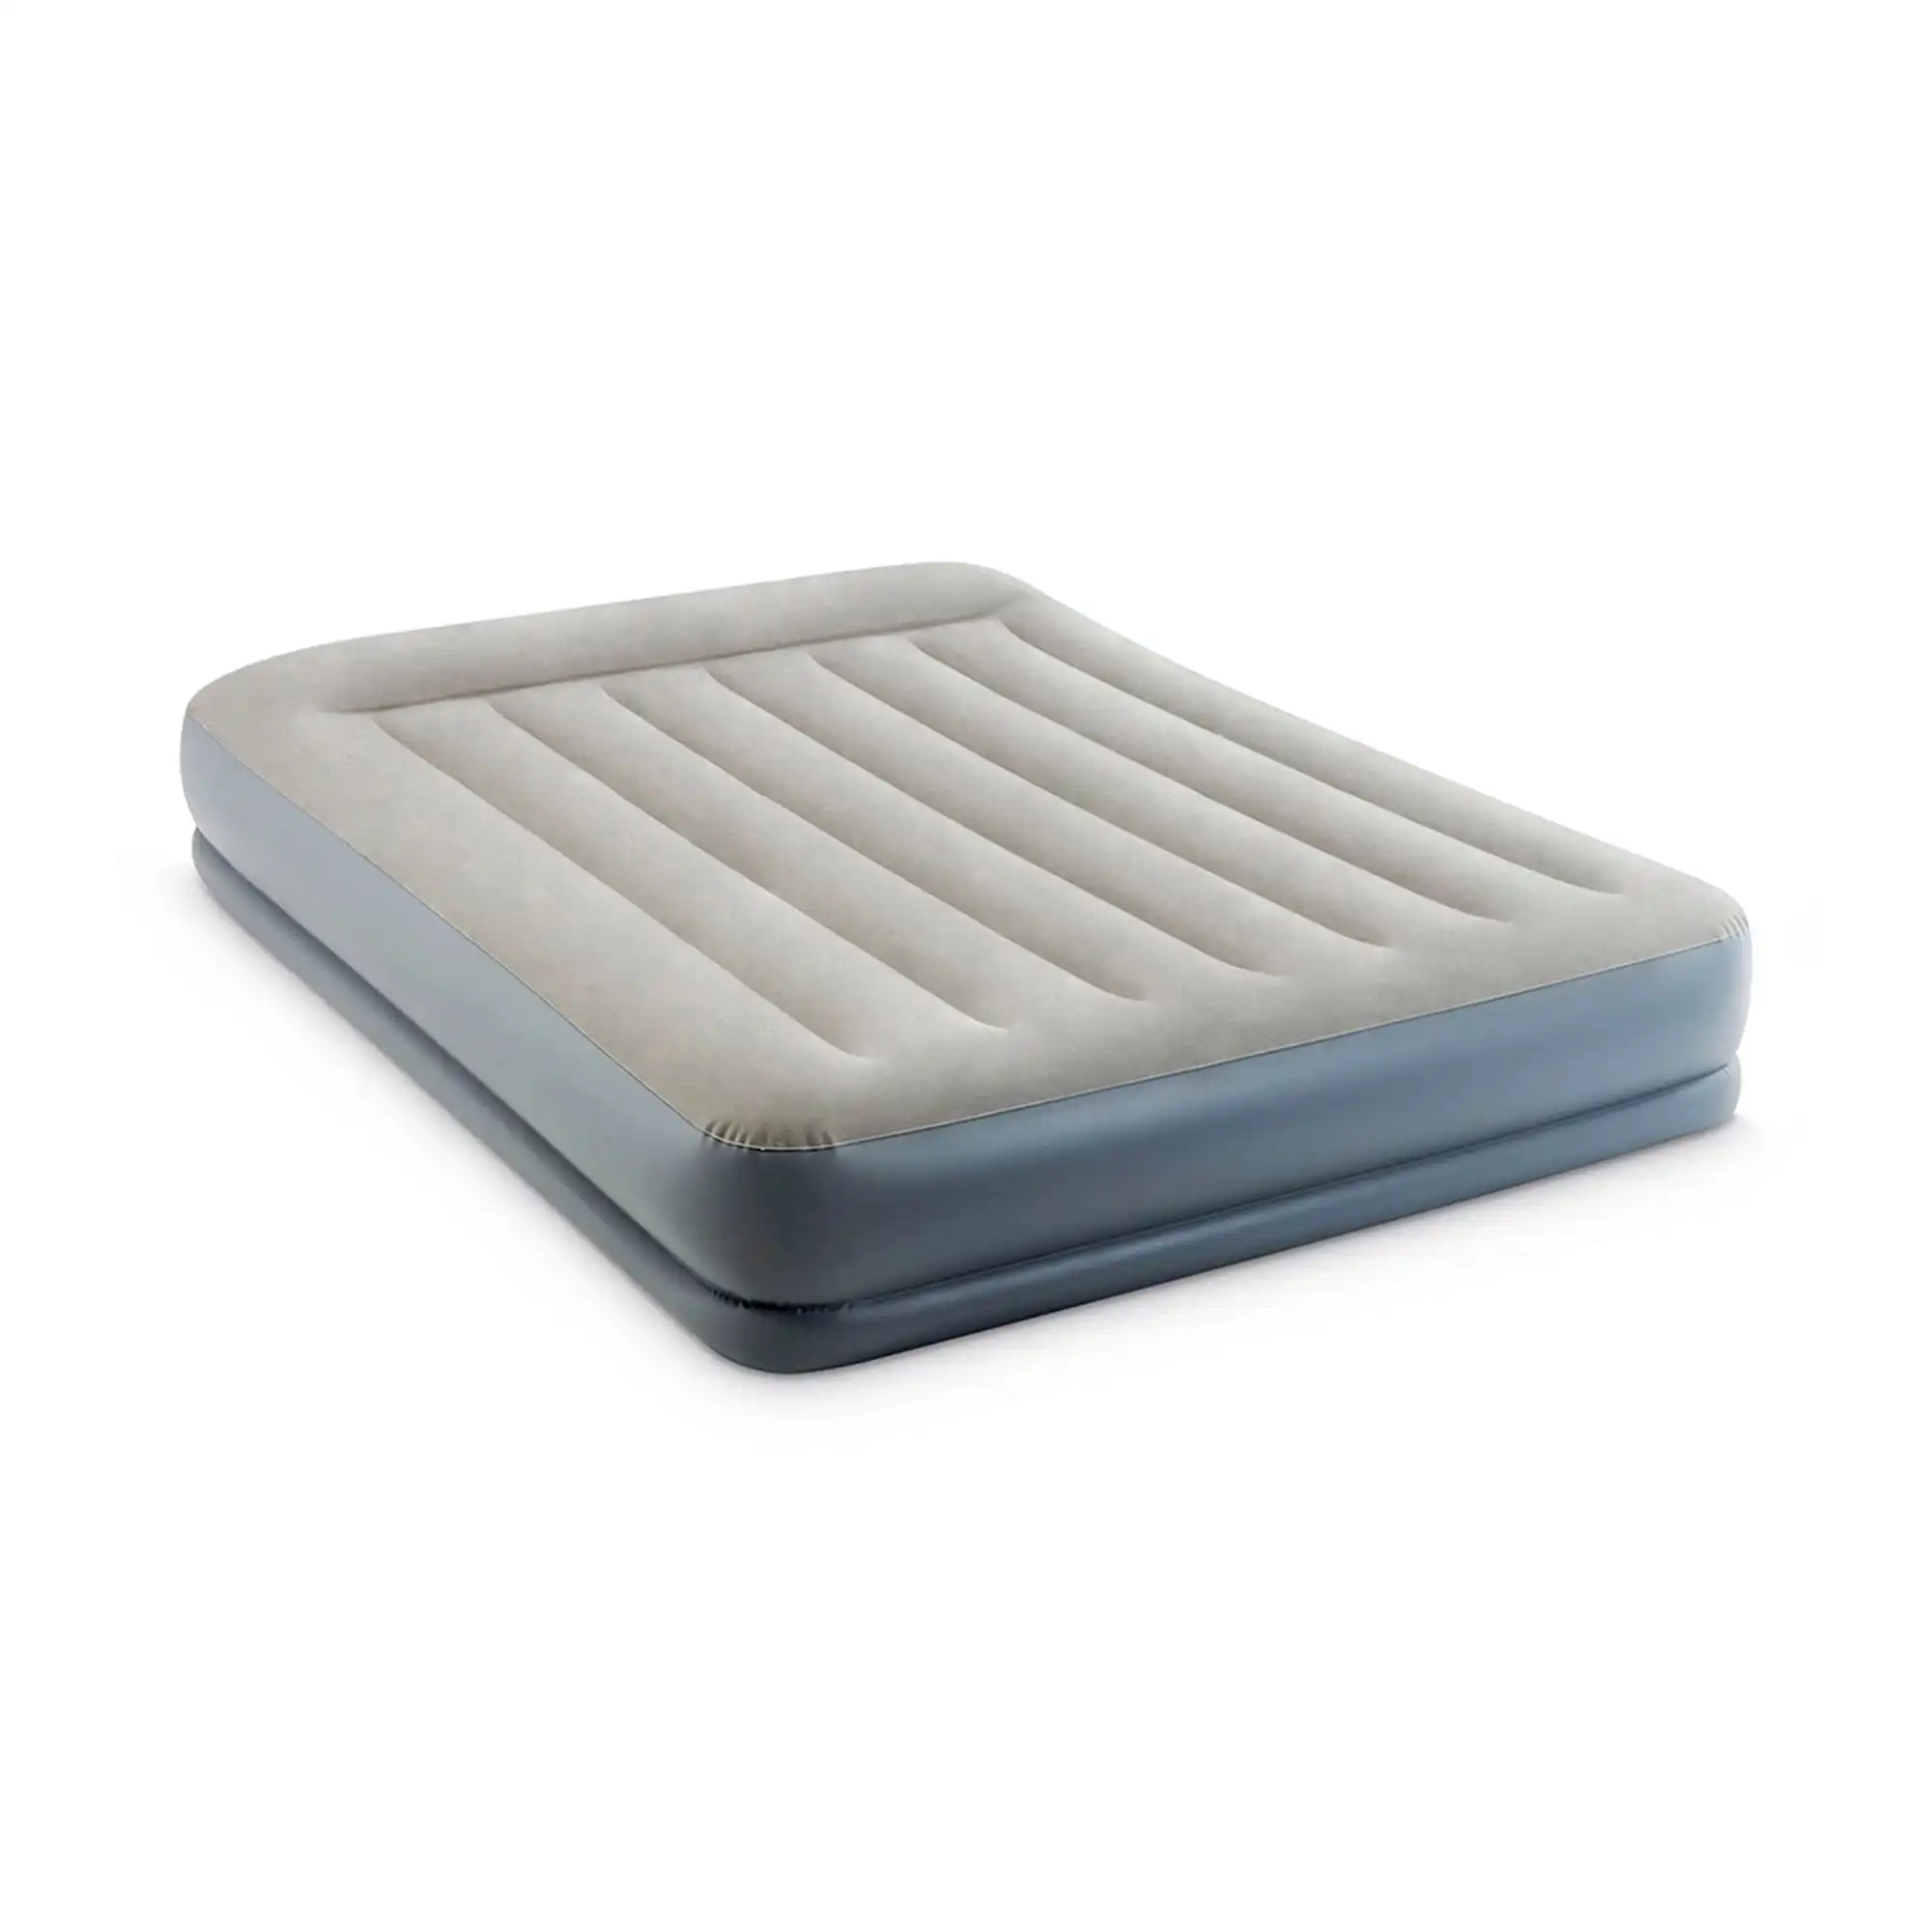 Queen Pillow Rest Mid-rise Airbed